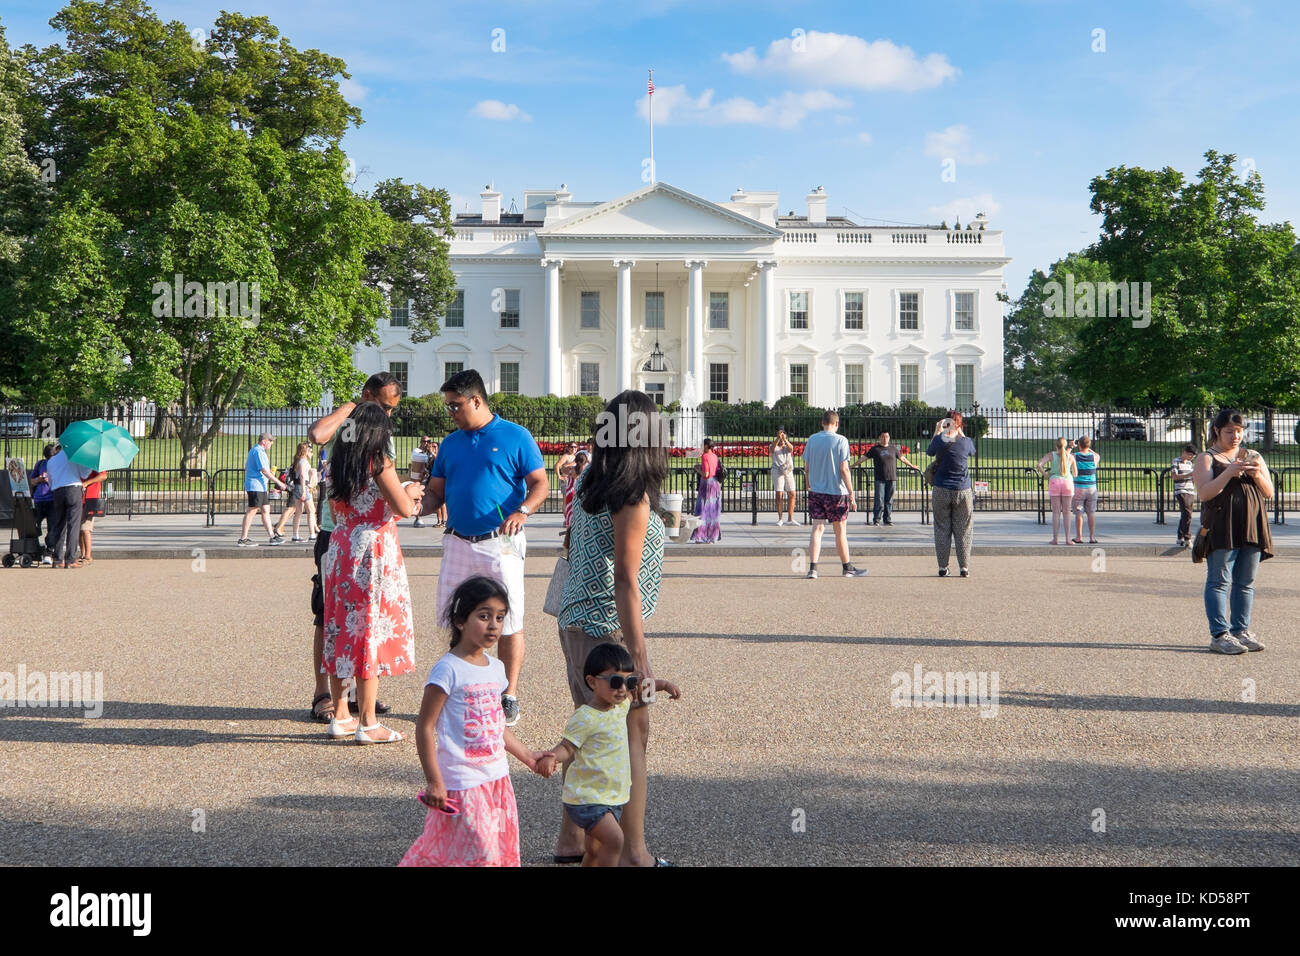 WASHINGTON DC-May 26, 2015: Whitehouse viewed from the front on a summer day with blue sky and puffy white clouds. Visitors wander around on the pedes Stock Photo